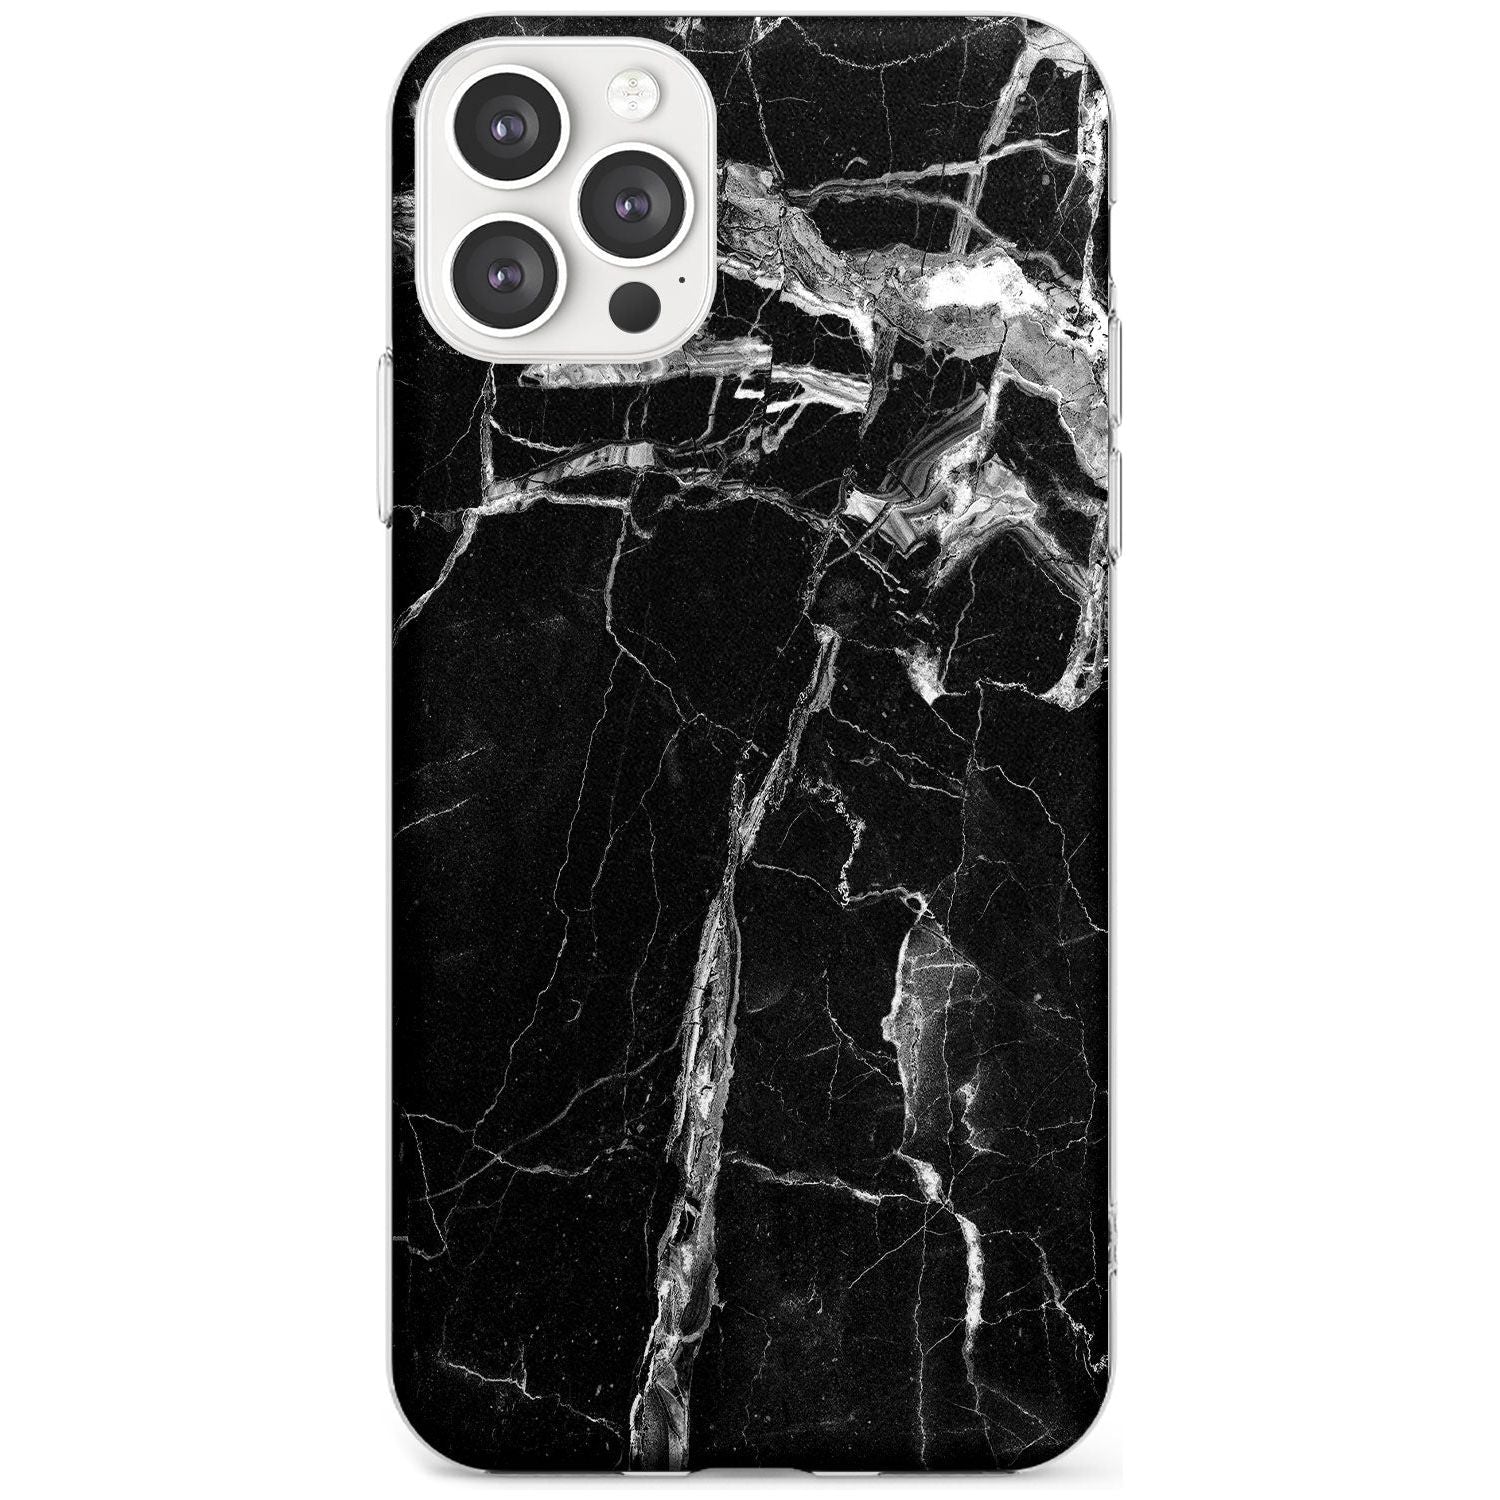 Black Onyx Marble Texture Black Impact Phone Case for iPhone 11 Pro Max